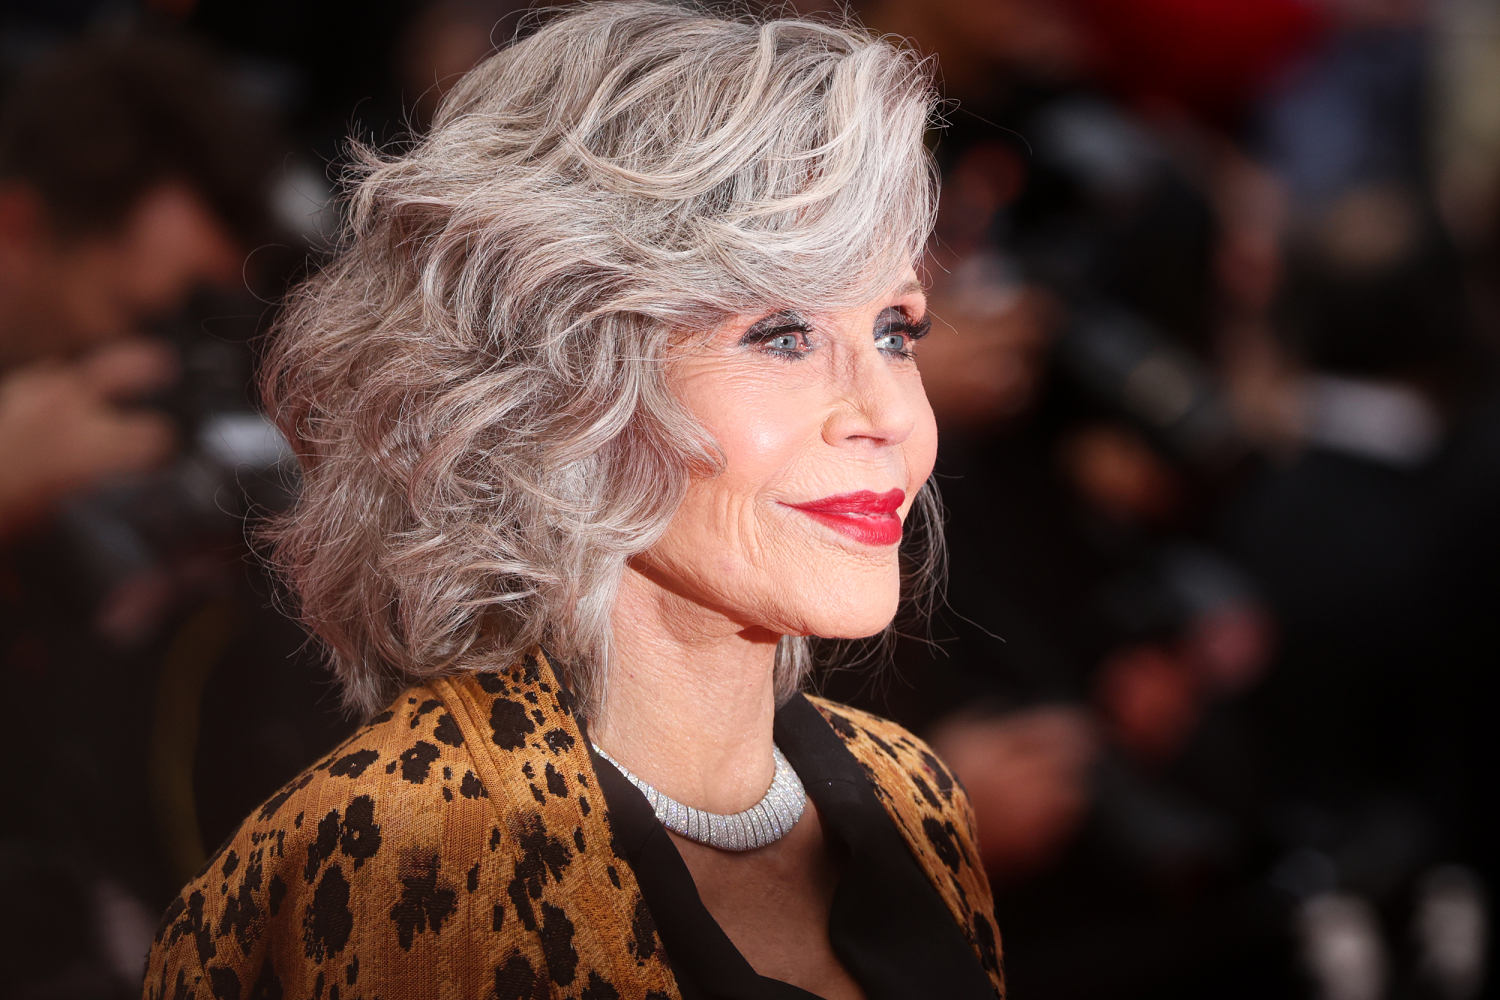 Why some conservative Vietnamese Americans are angry about L.A. County's new 'Jane Fonda Day'